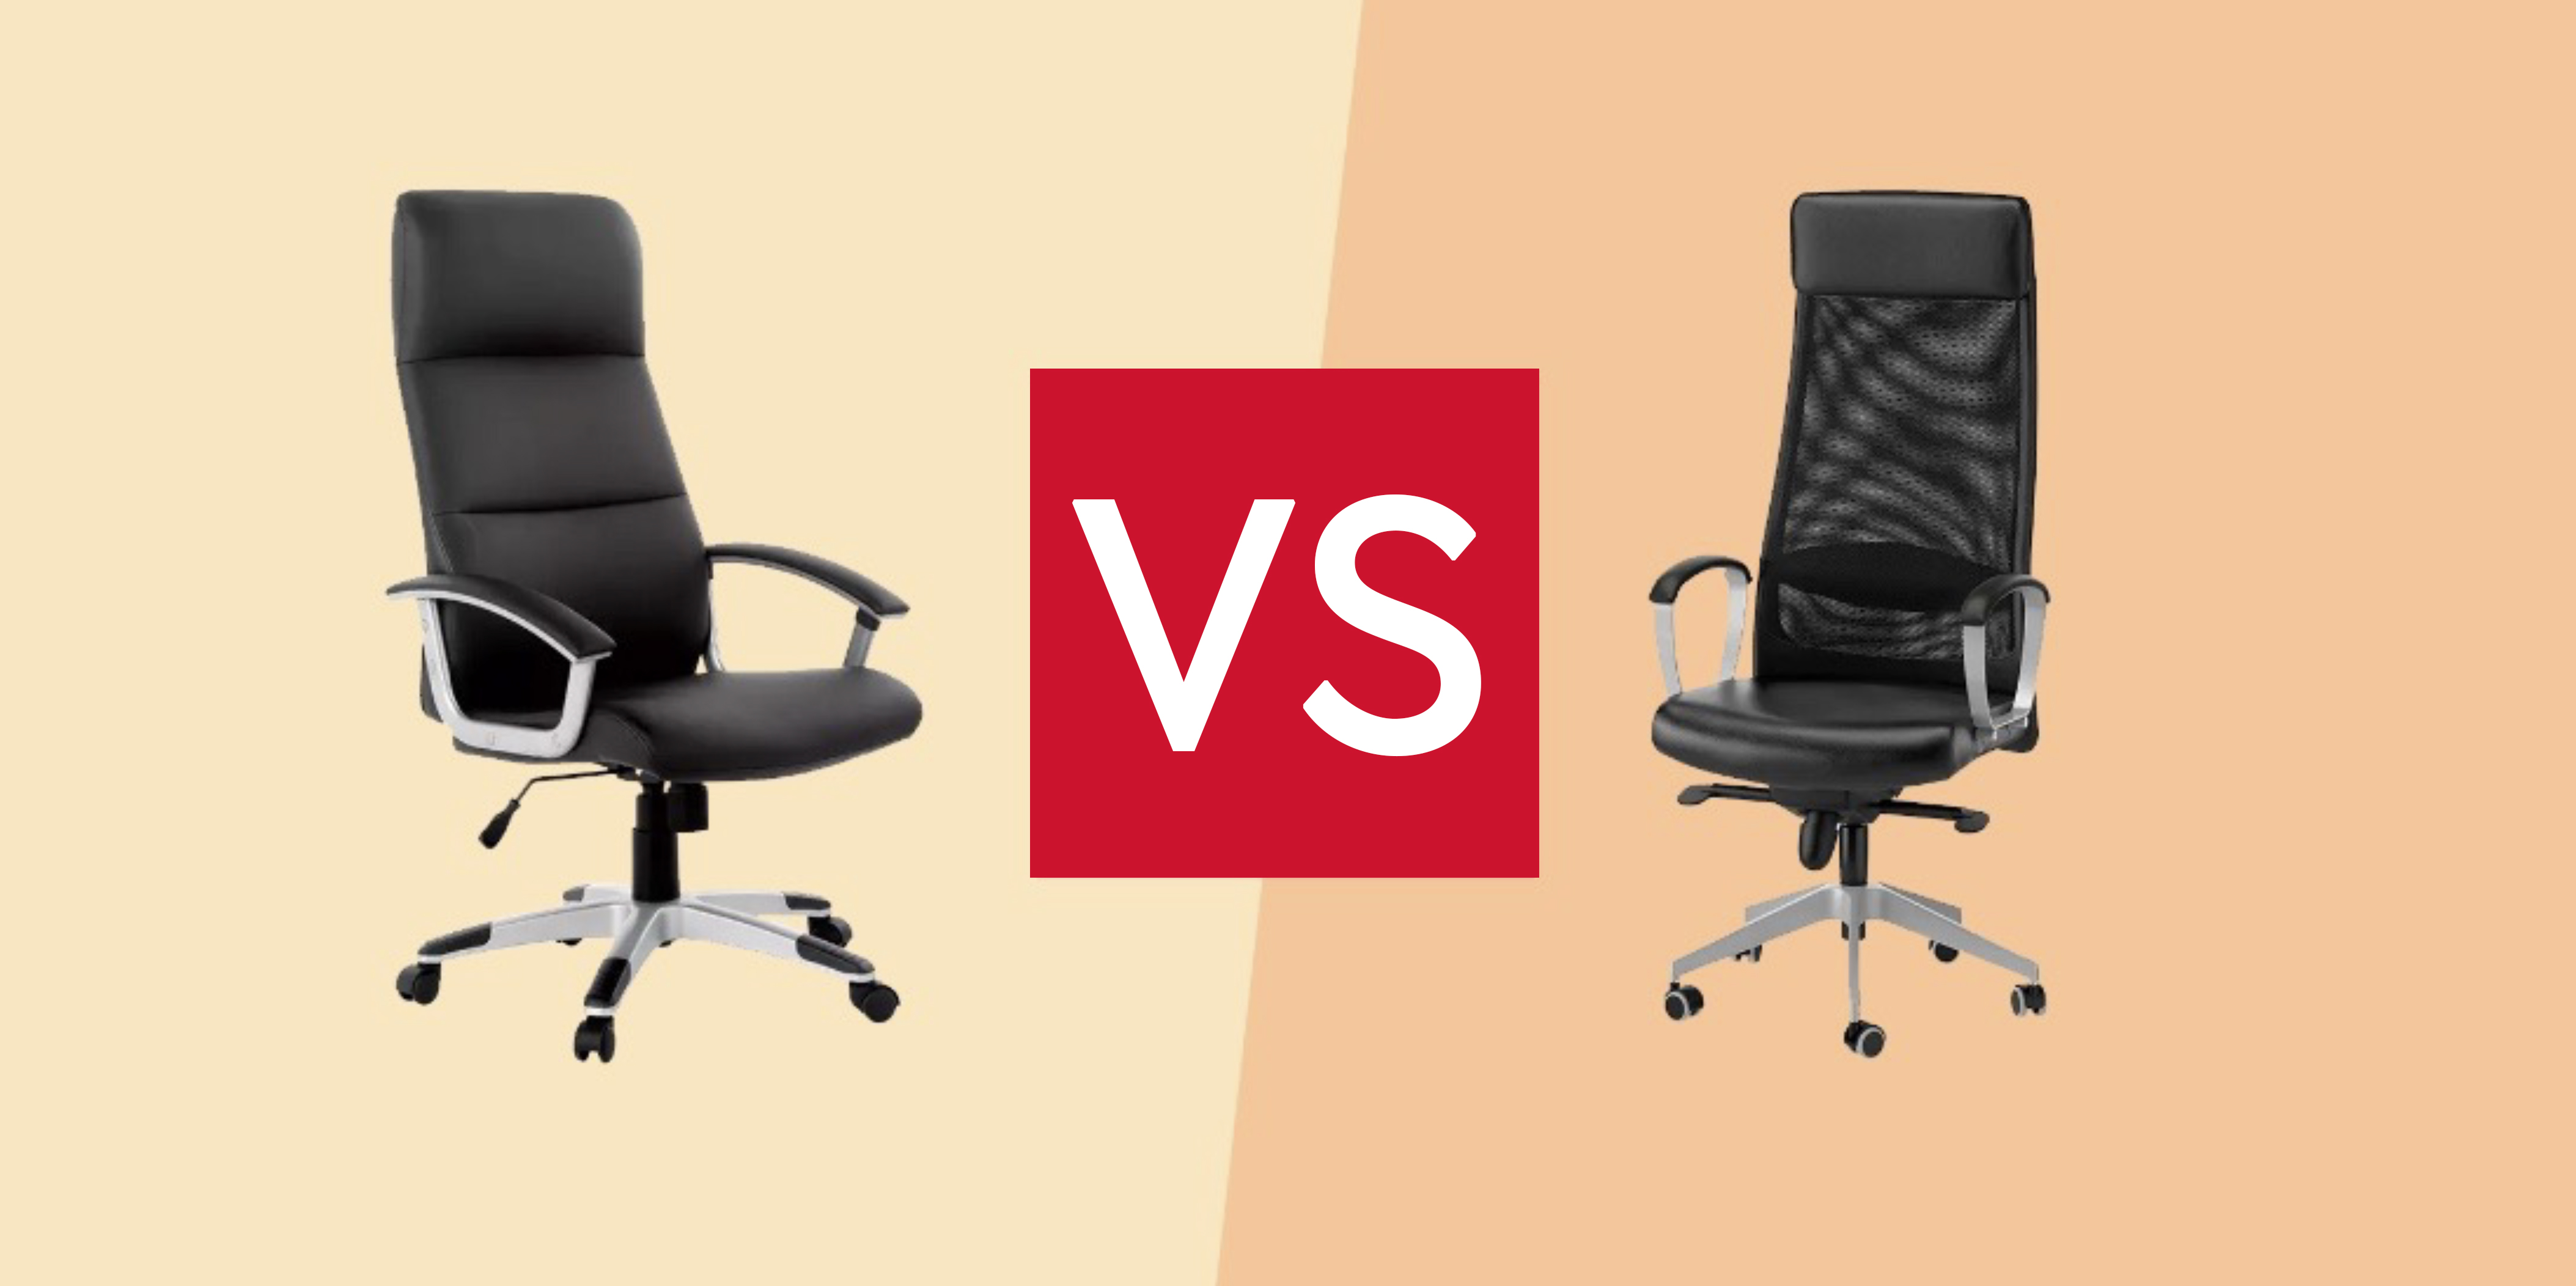 Mesh vs Fabric – What’s the Best Office Chair Material?